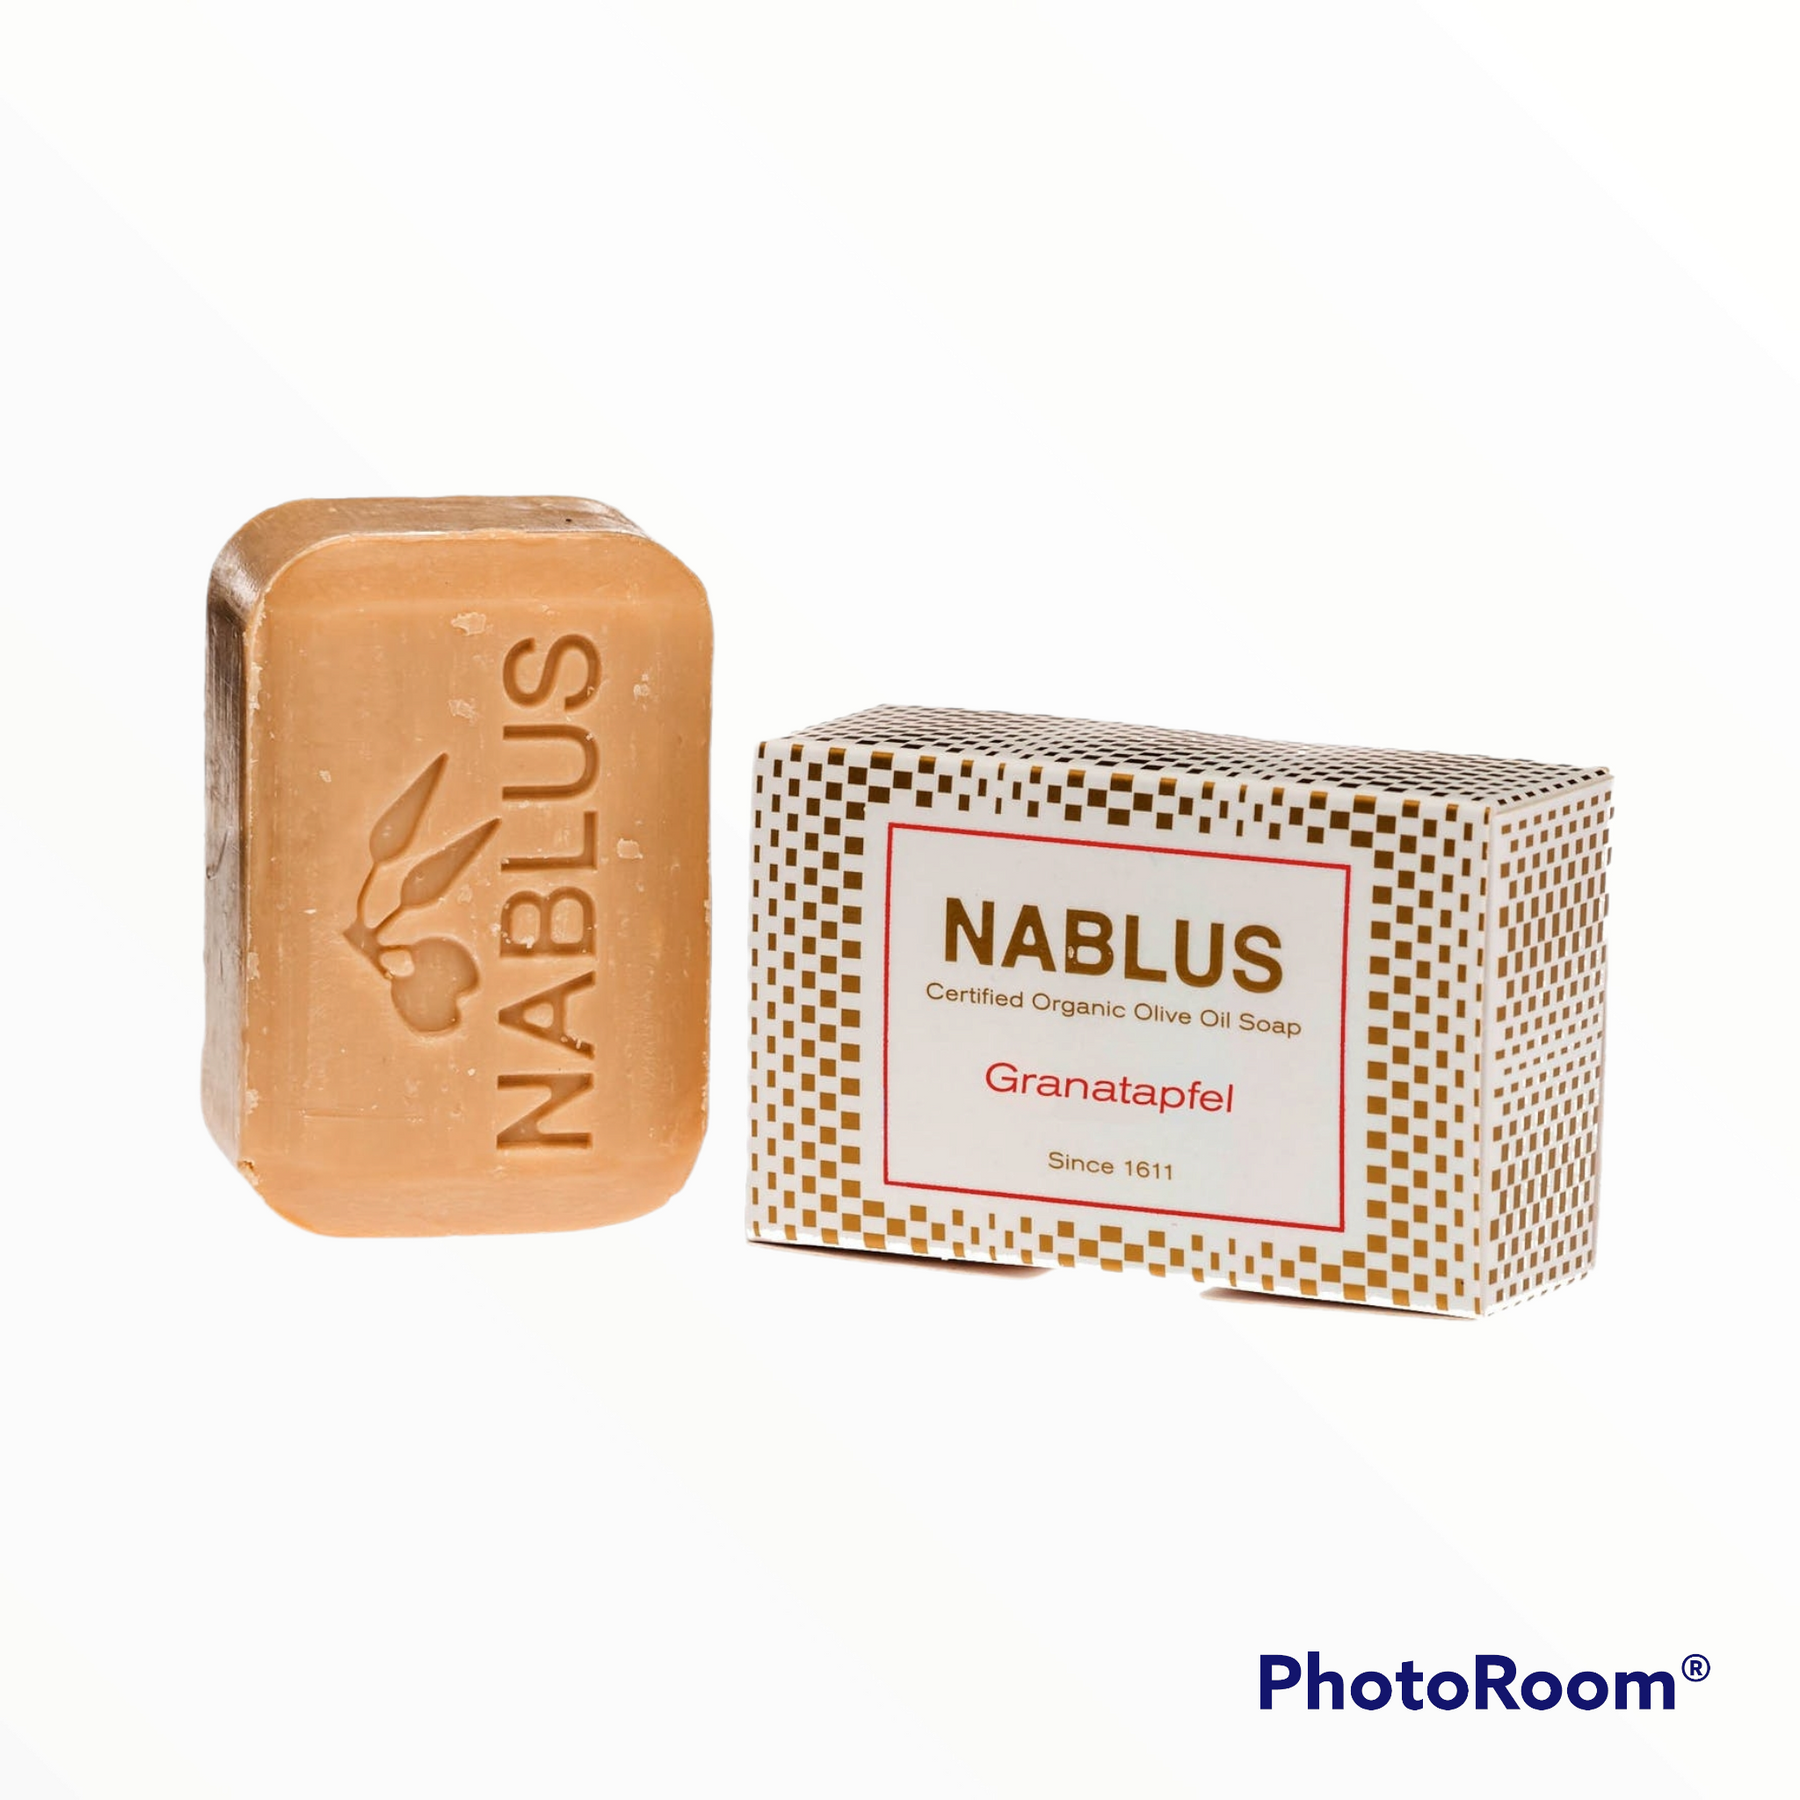 NABLUS SOAP Organic olive oil soap pomegranate, PALM OIL-FREE, VEGAN, unscented and moisturizing, suitable for all skin types, 100g